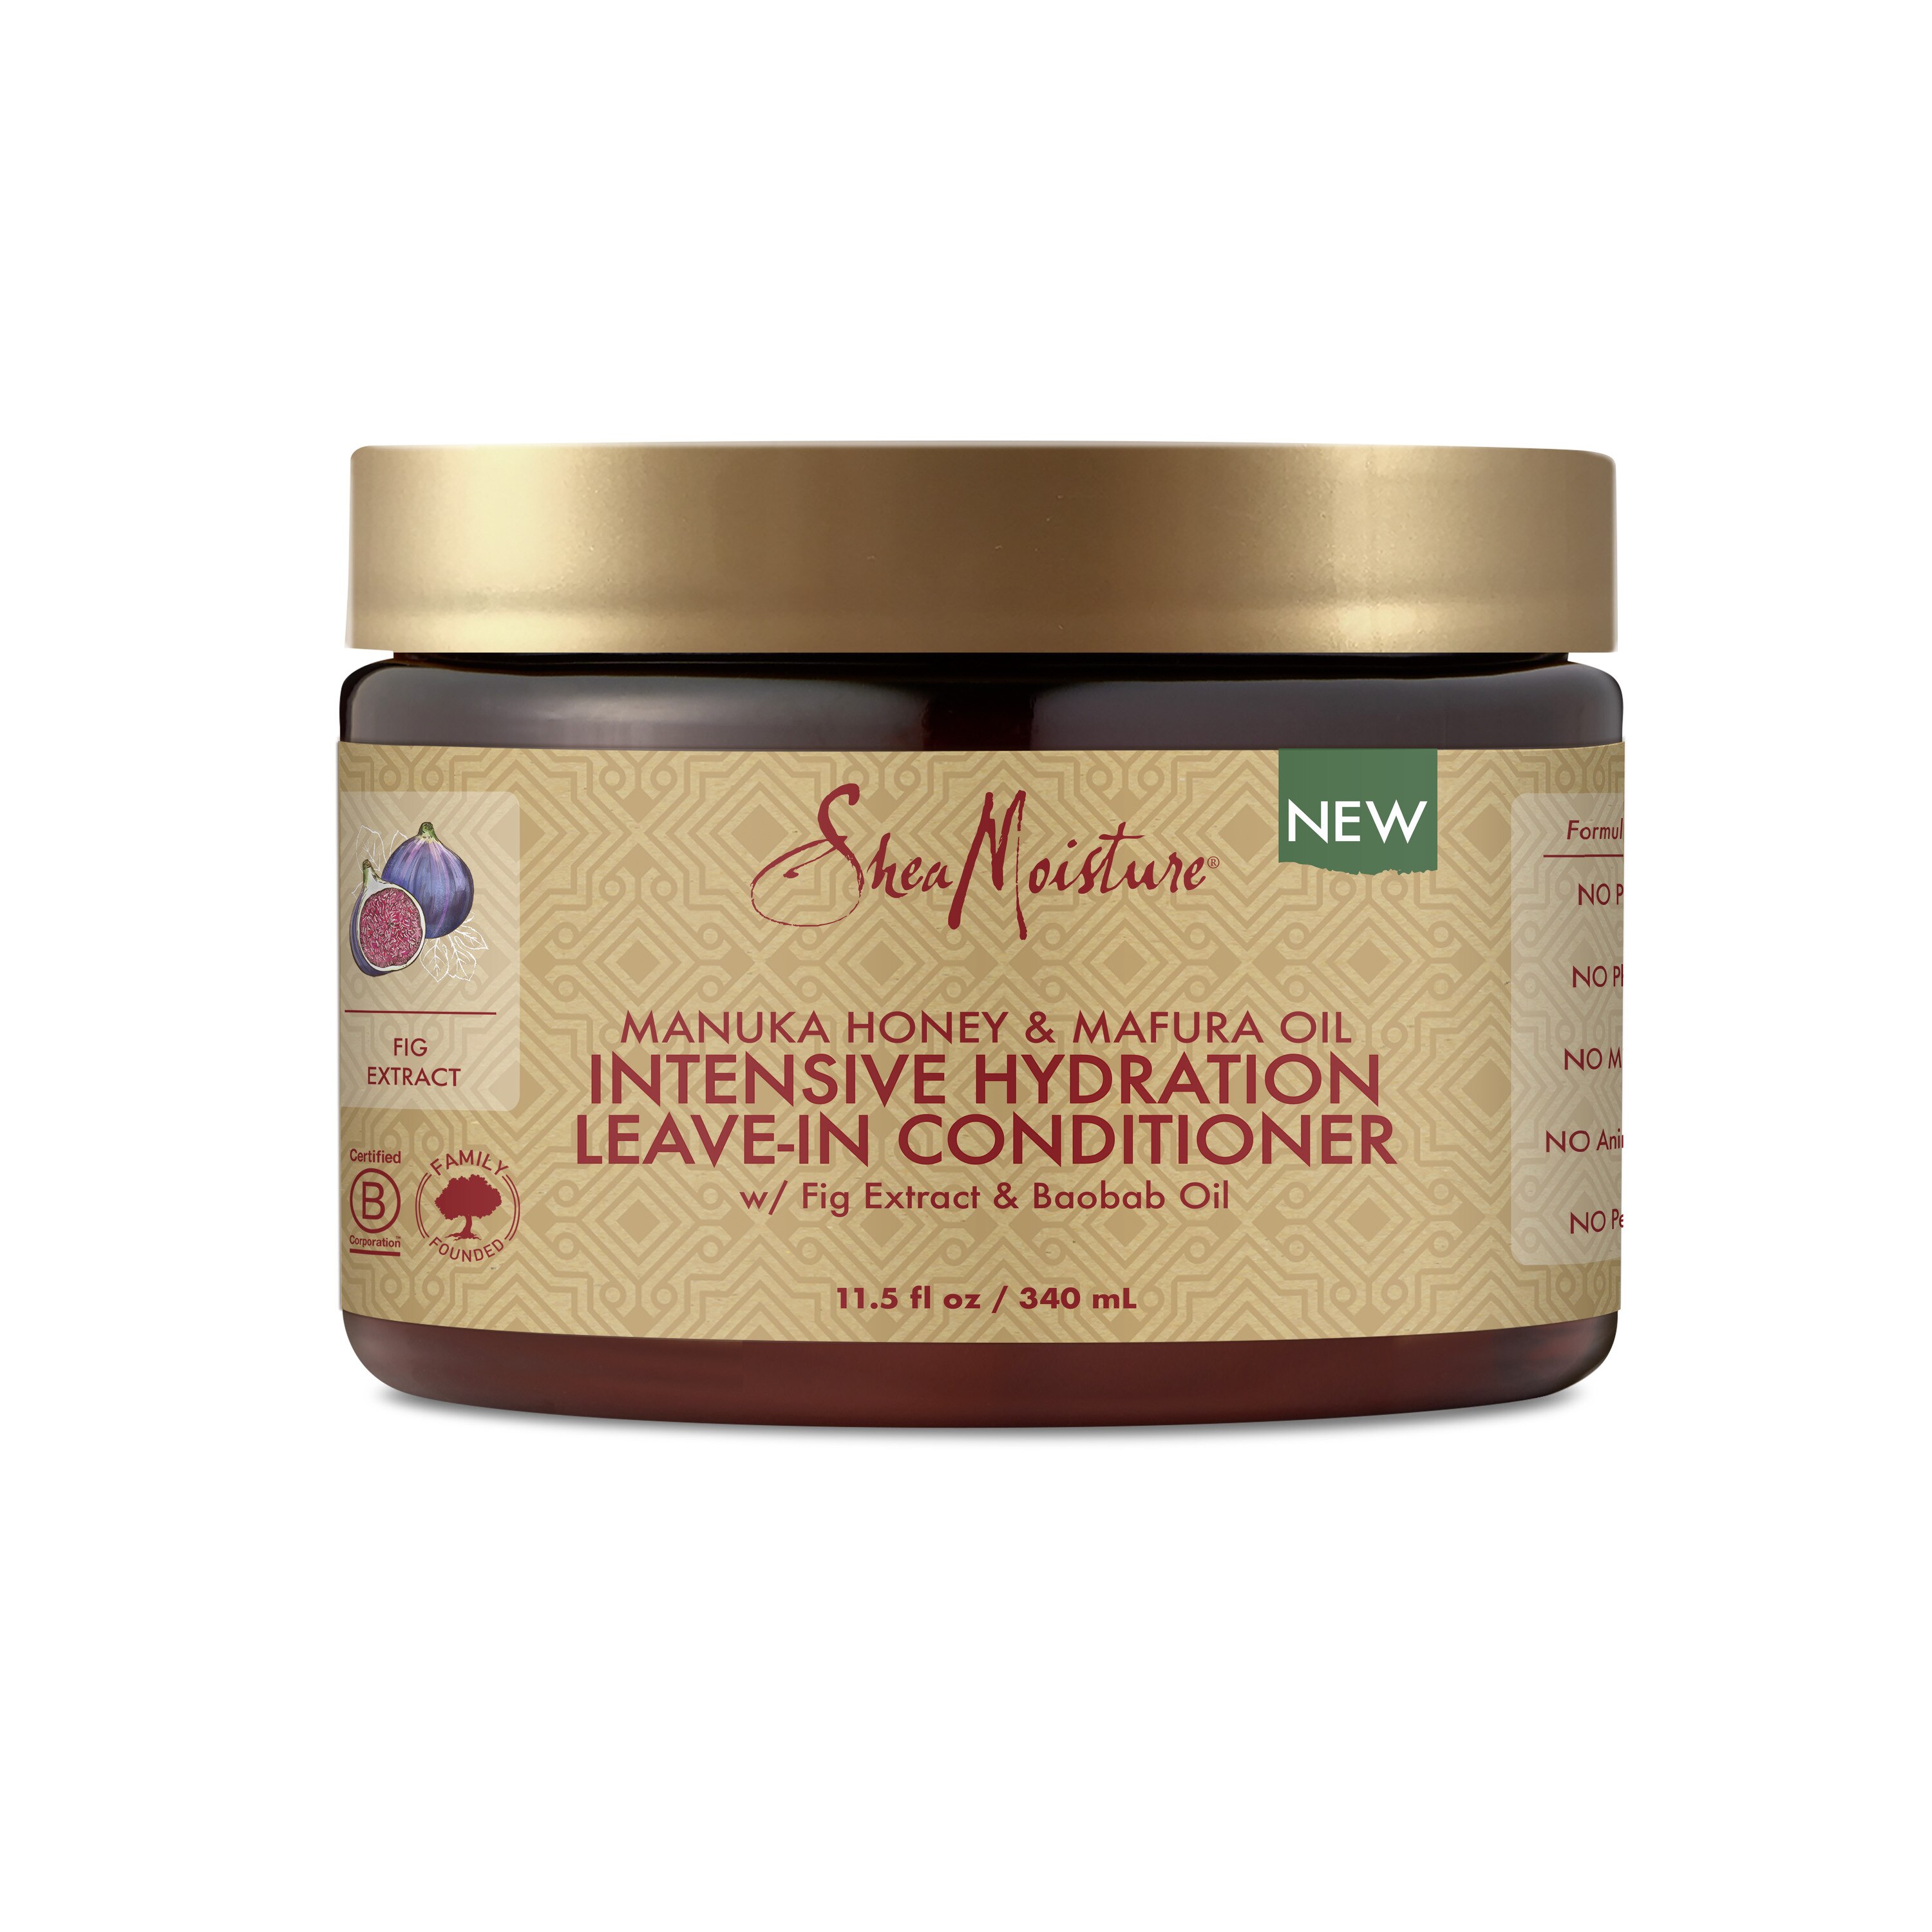 SheaMoisture Intensive Hydration Leave-In Conditioner, 11.5 OZ